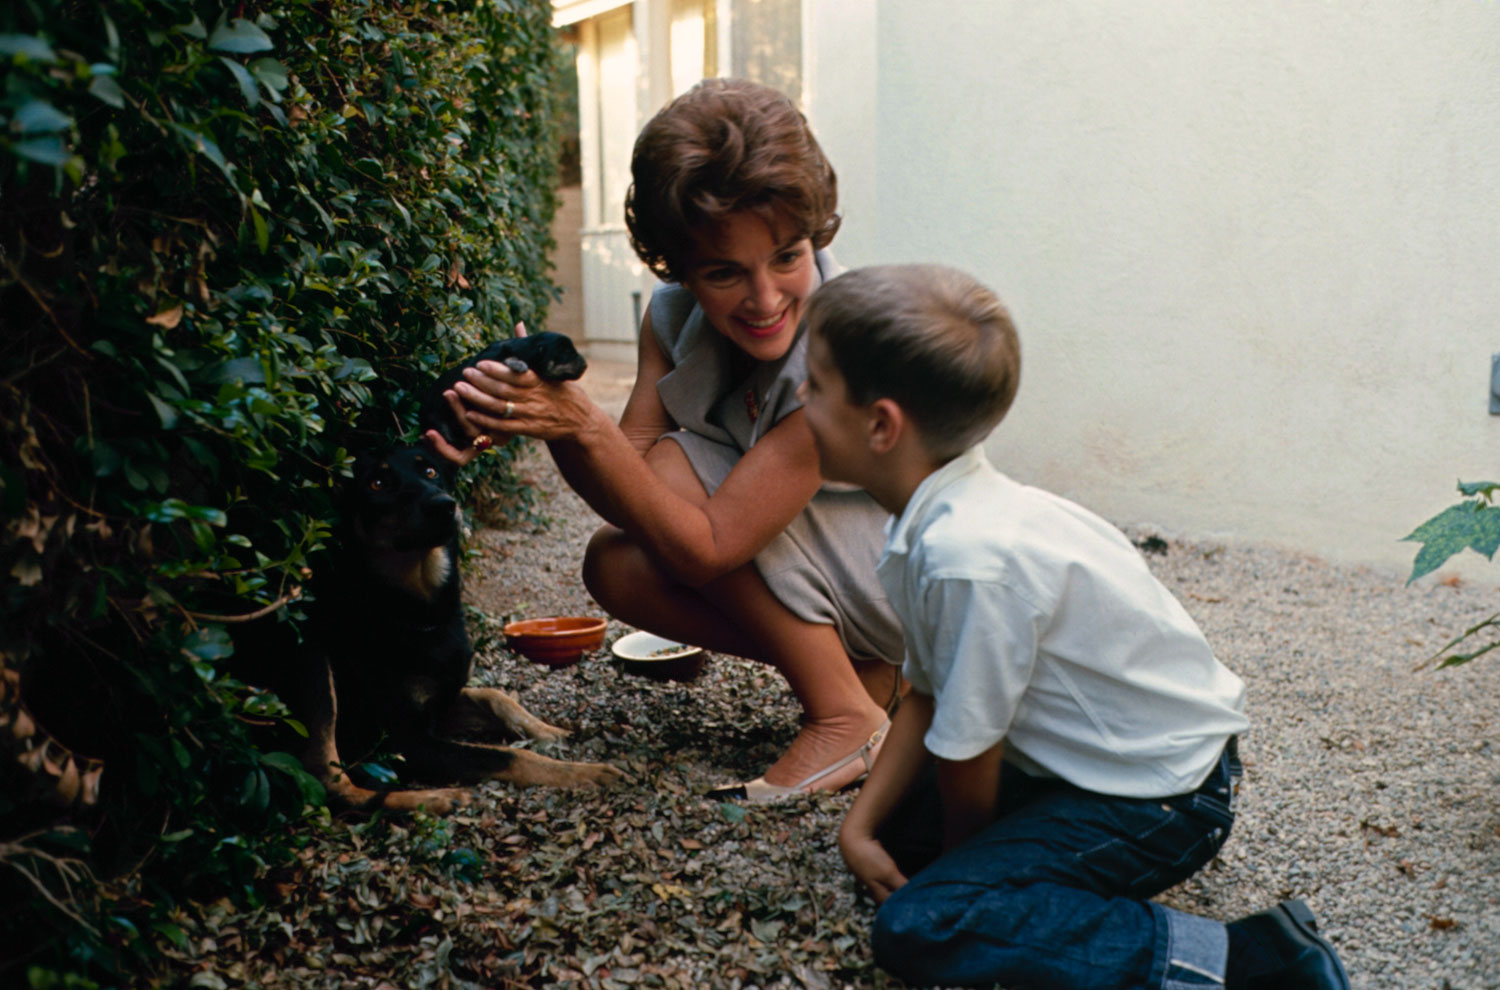 Future First Lady Nancy Reagan and her son, Ron Jr., 1965.